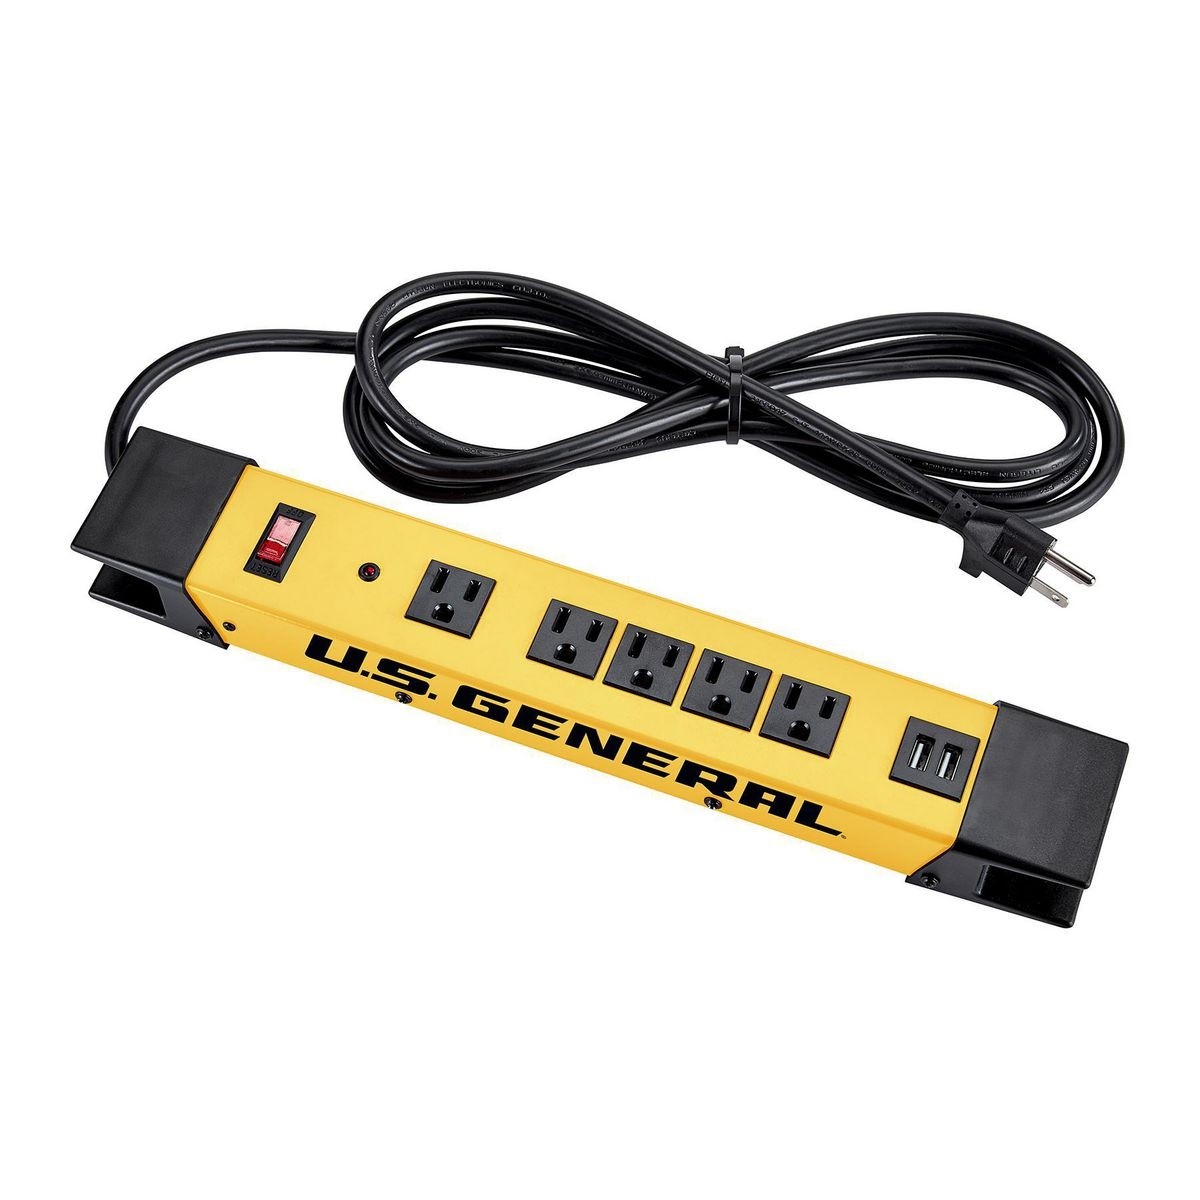 U.S. GENERAL 5 Outlet Magnetic Power Strip With Metal Housing And 2 USB Ports – Yellow – Item 57251